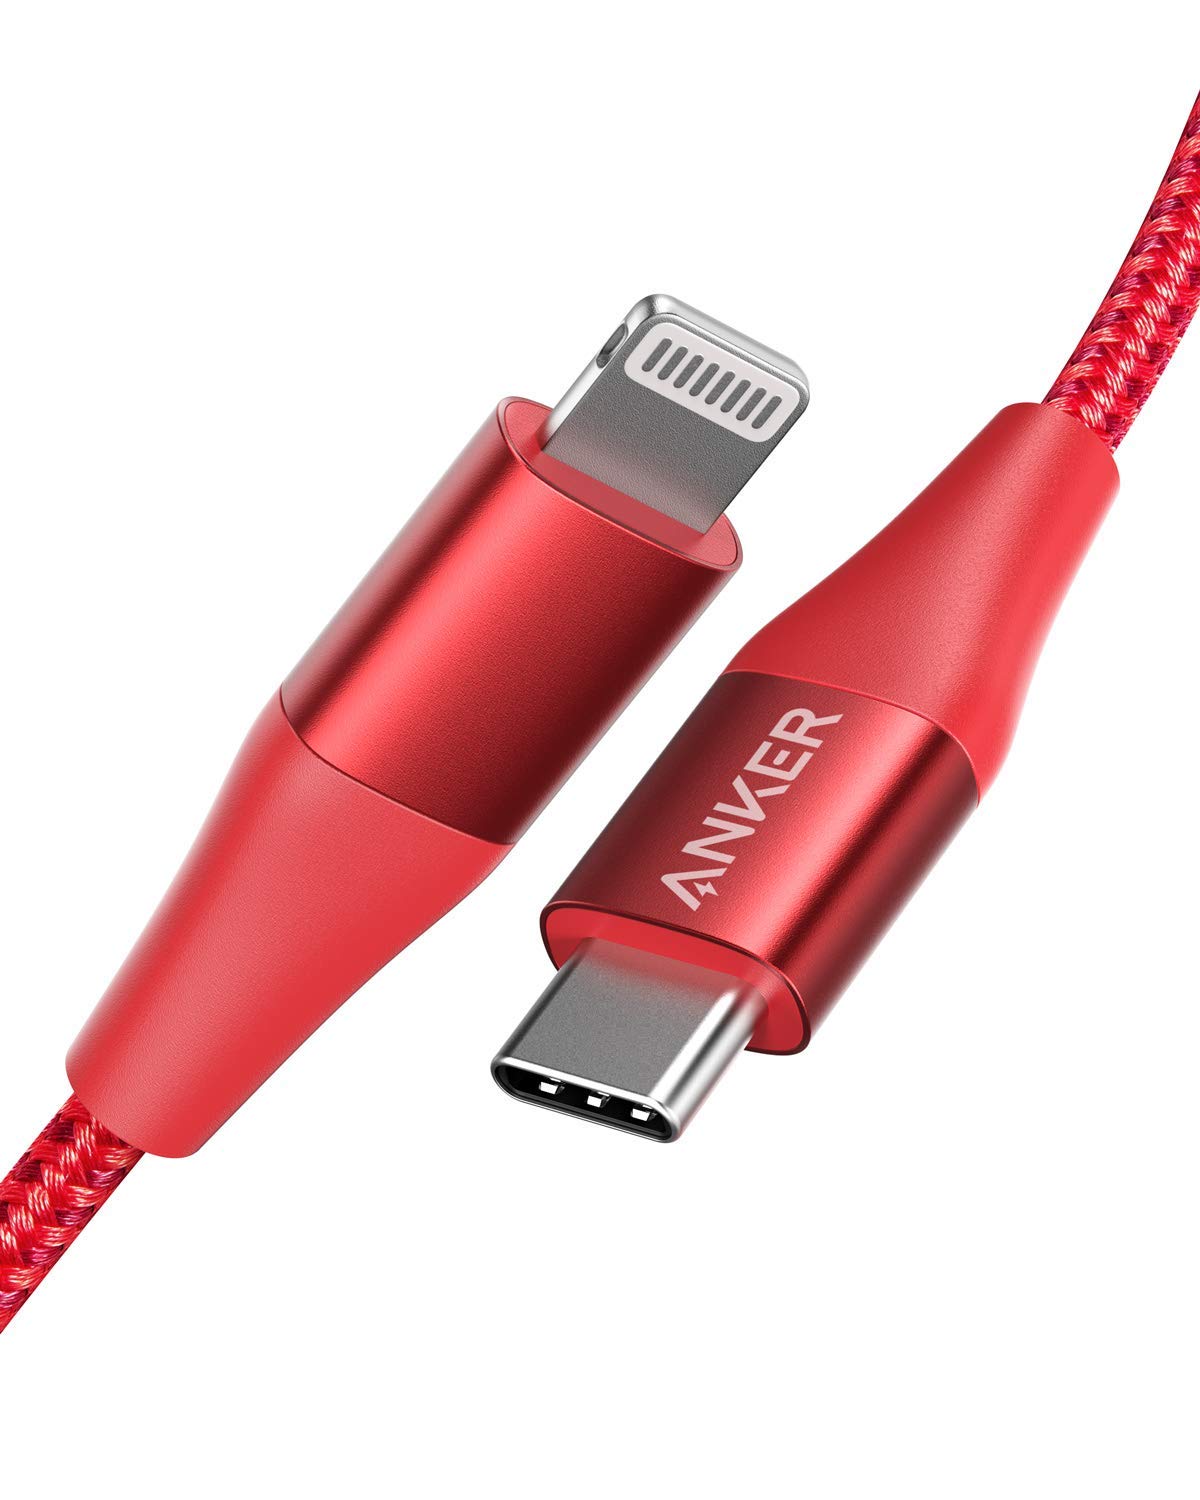 USB cable with a red X